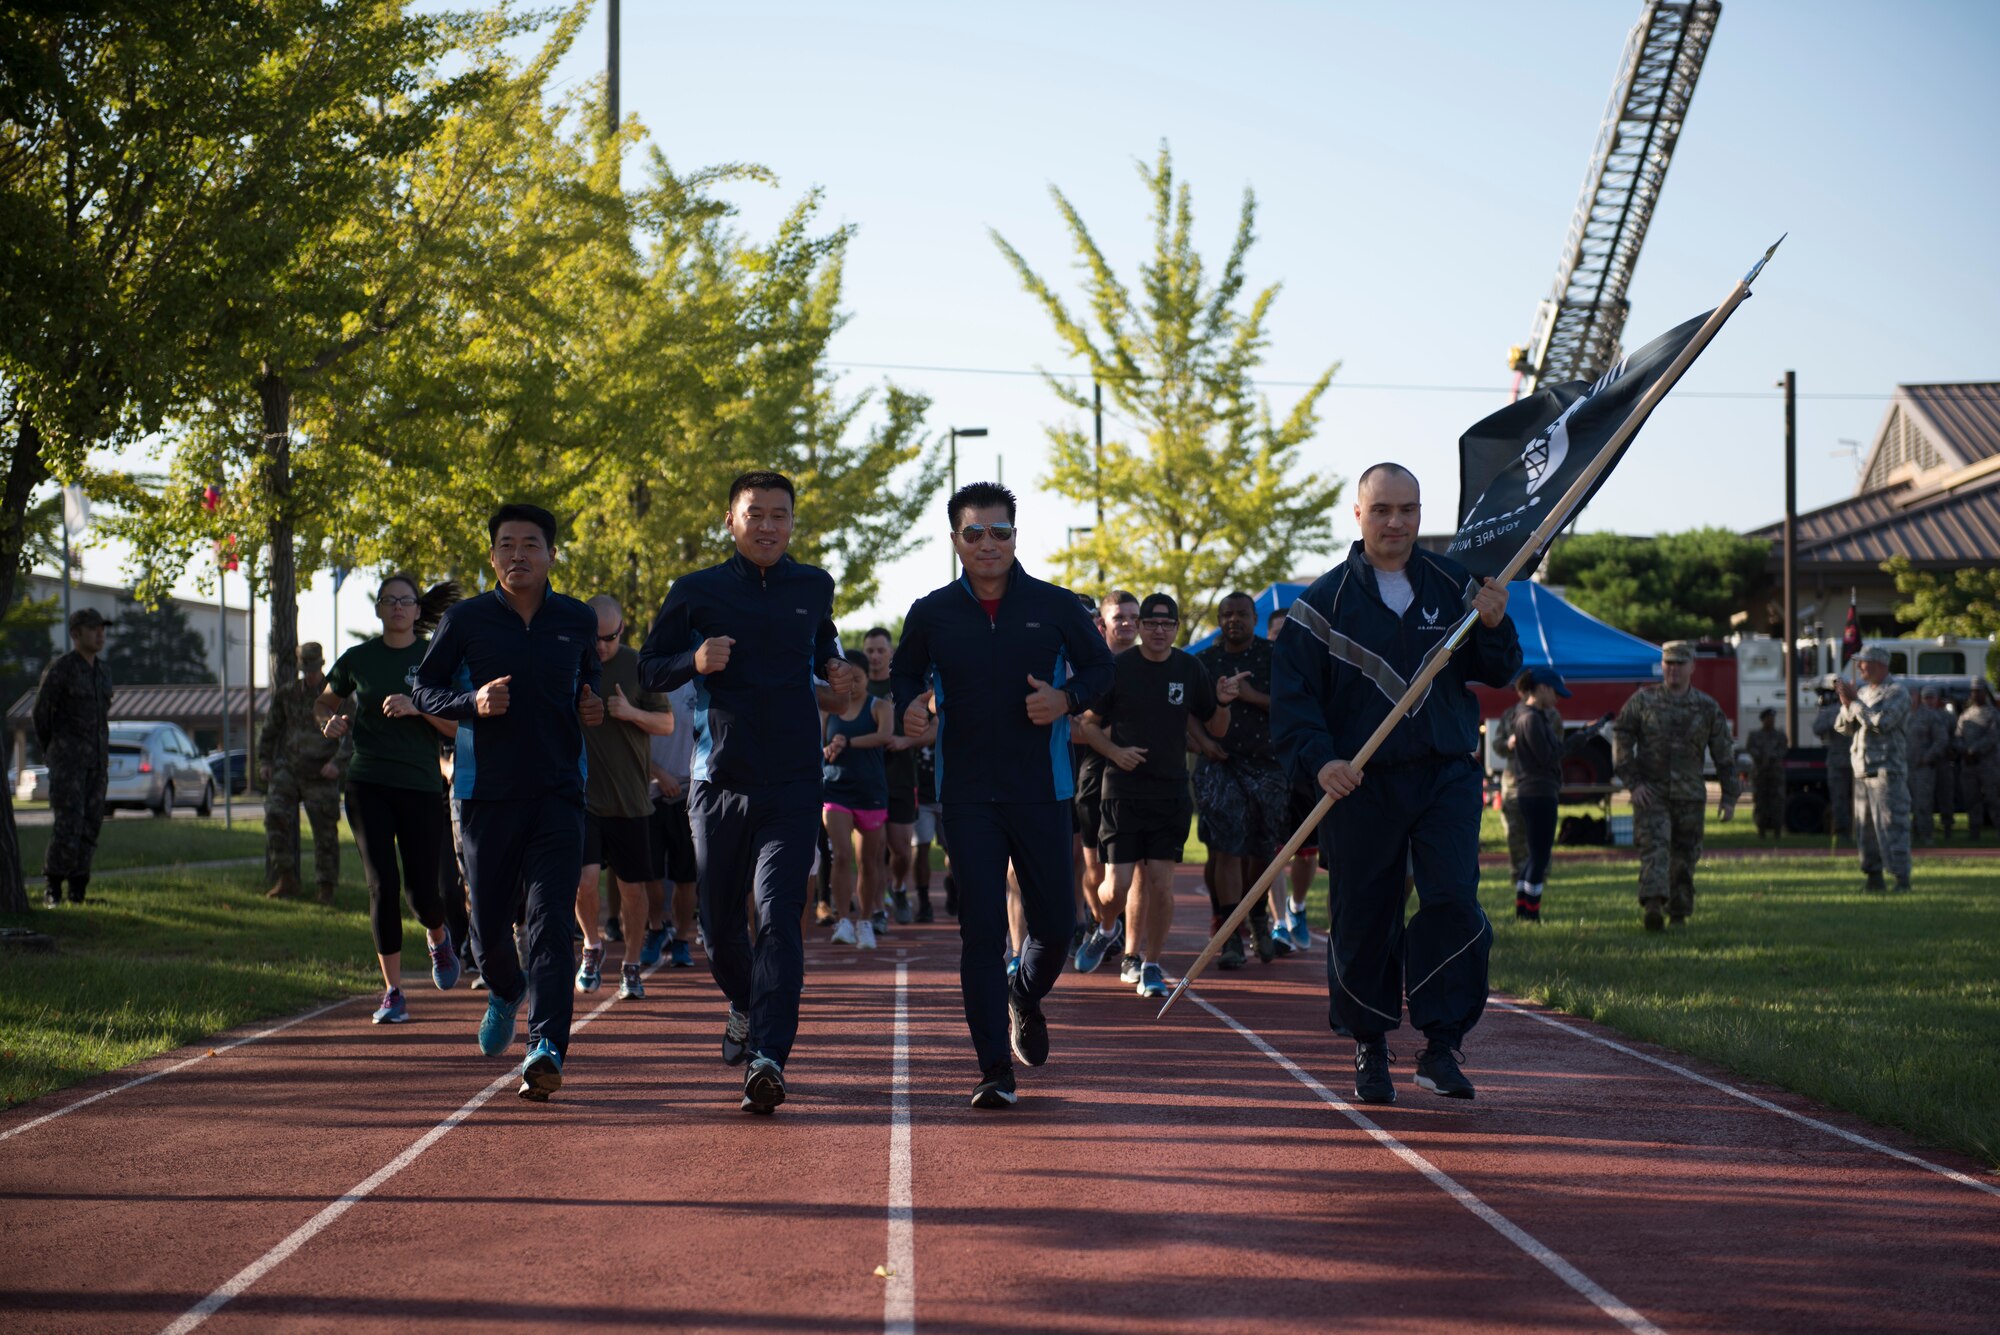 U.S. Air Force Col. Lawrence Sullivan (far right), 8th Fighter Wing vice commander, runs with Republic of Korea Air Force’s 38th Fighter Group leadership to start a 24-hour prisoners of war and missing in action memorial run at Kunsan Air Base, Republic of Korea, Sept. 19, 2019. The Wolf Pack held several events throughout the week, such as a 10 kilometer ruck march, a memorial run and a candle light vigil. (U.S. Air Force photo by Senior Airman Stefan Alvarez)